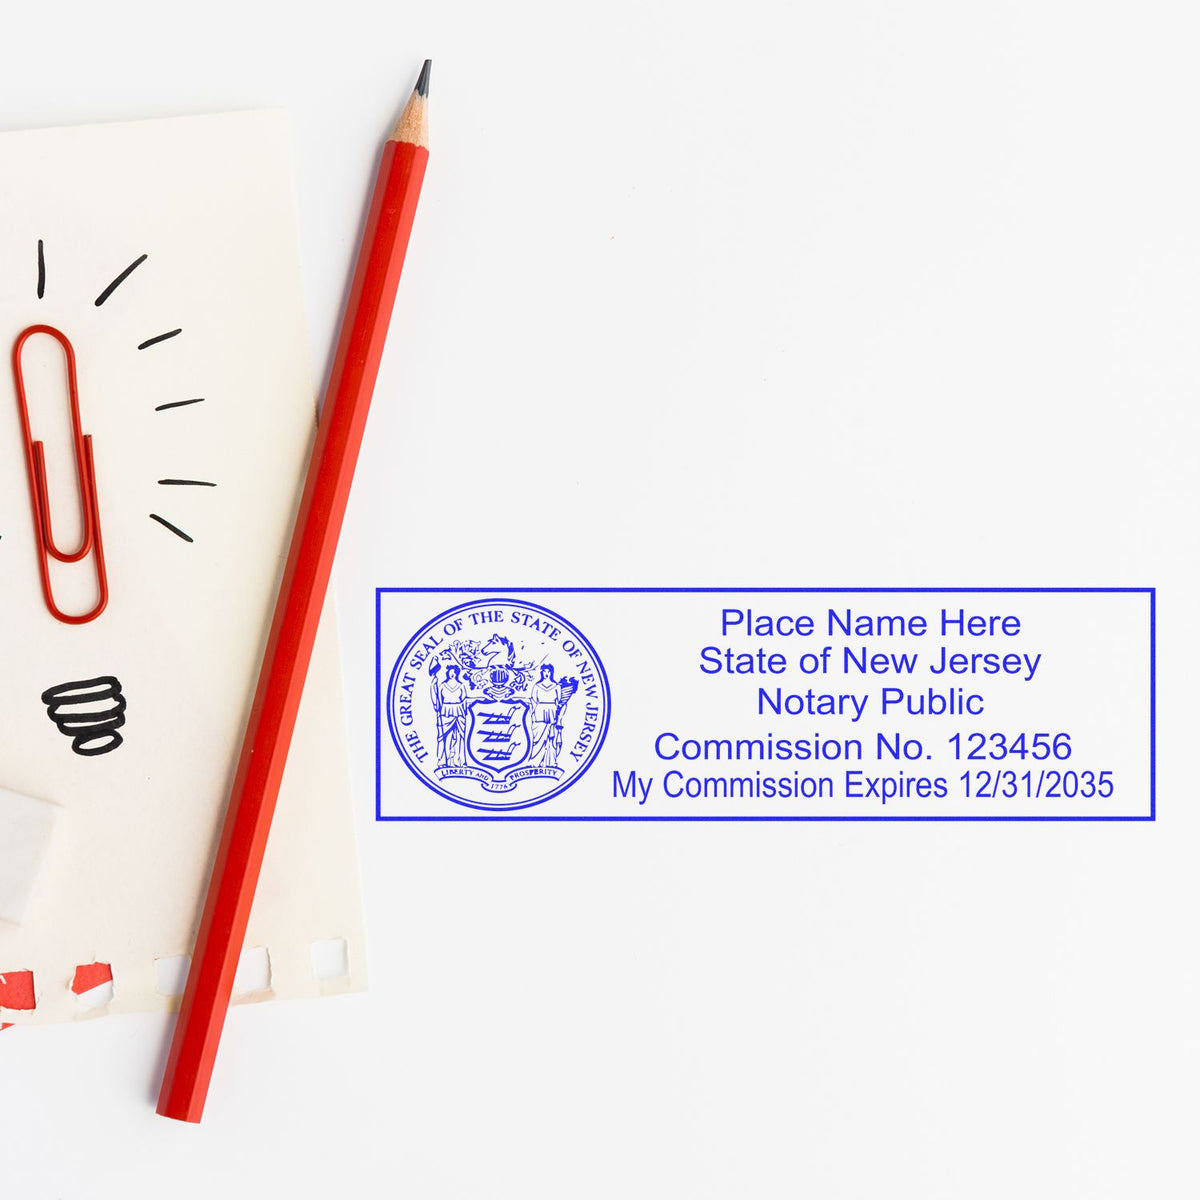 This paper is stamped with a sample imprint of the Wooden Handle New Jersey State Seal Notary Public Stamp, signifying its quality and reliability.